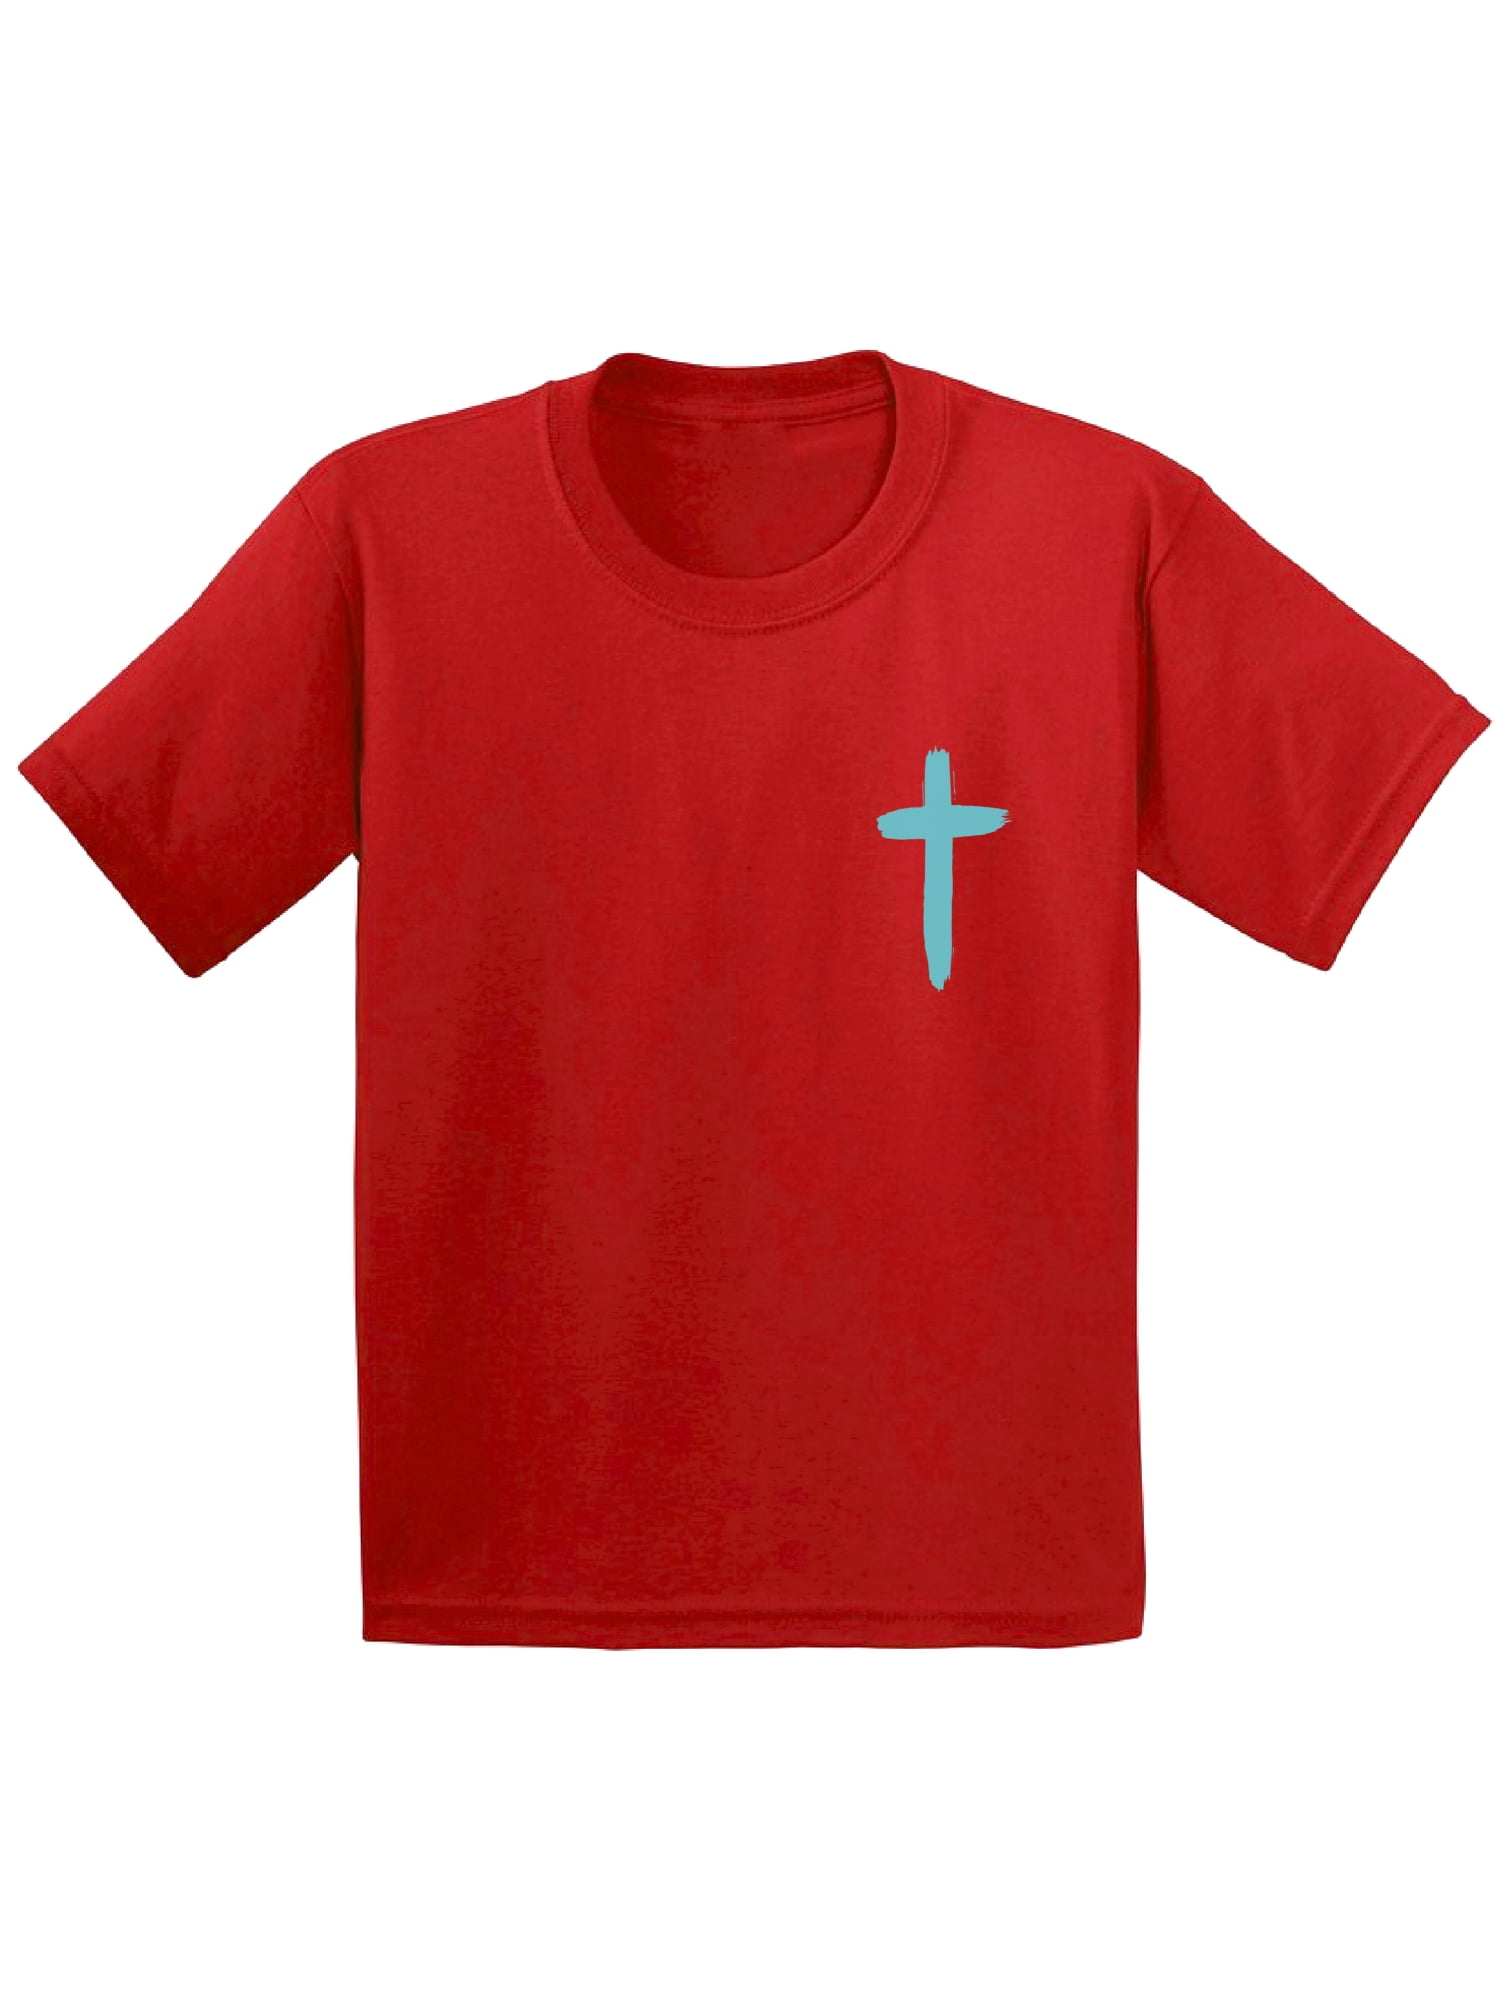 Awkward Styles Turquoise Cross Youth Shirt Christian T Shirt for Boys ...